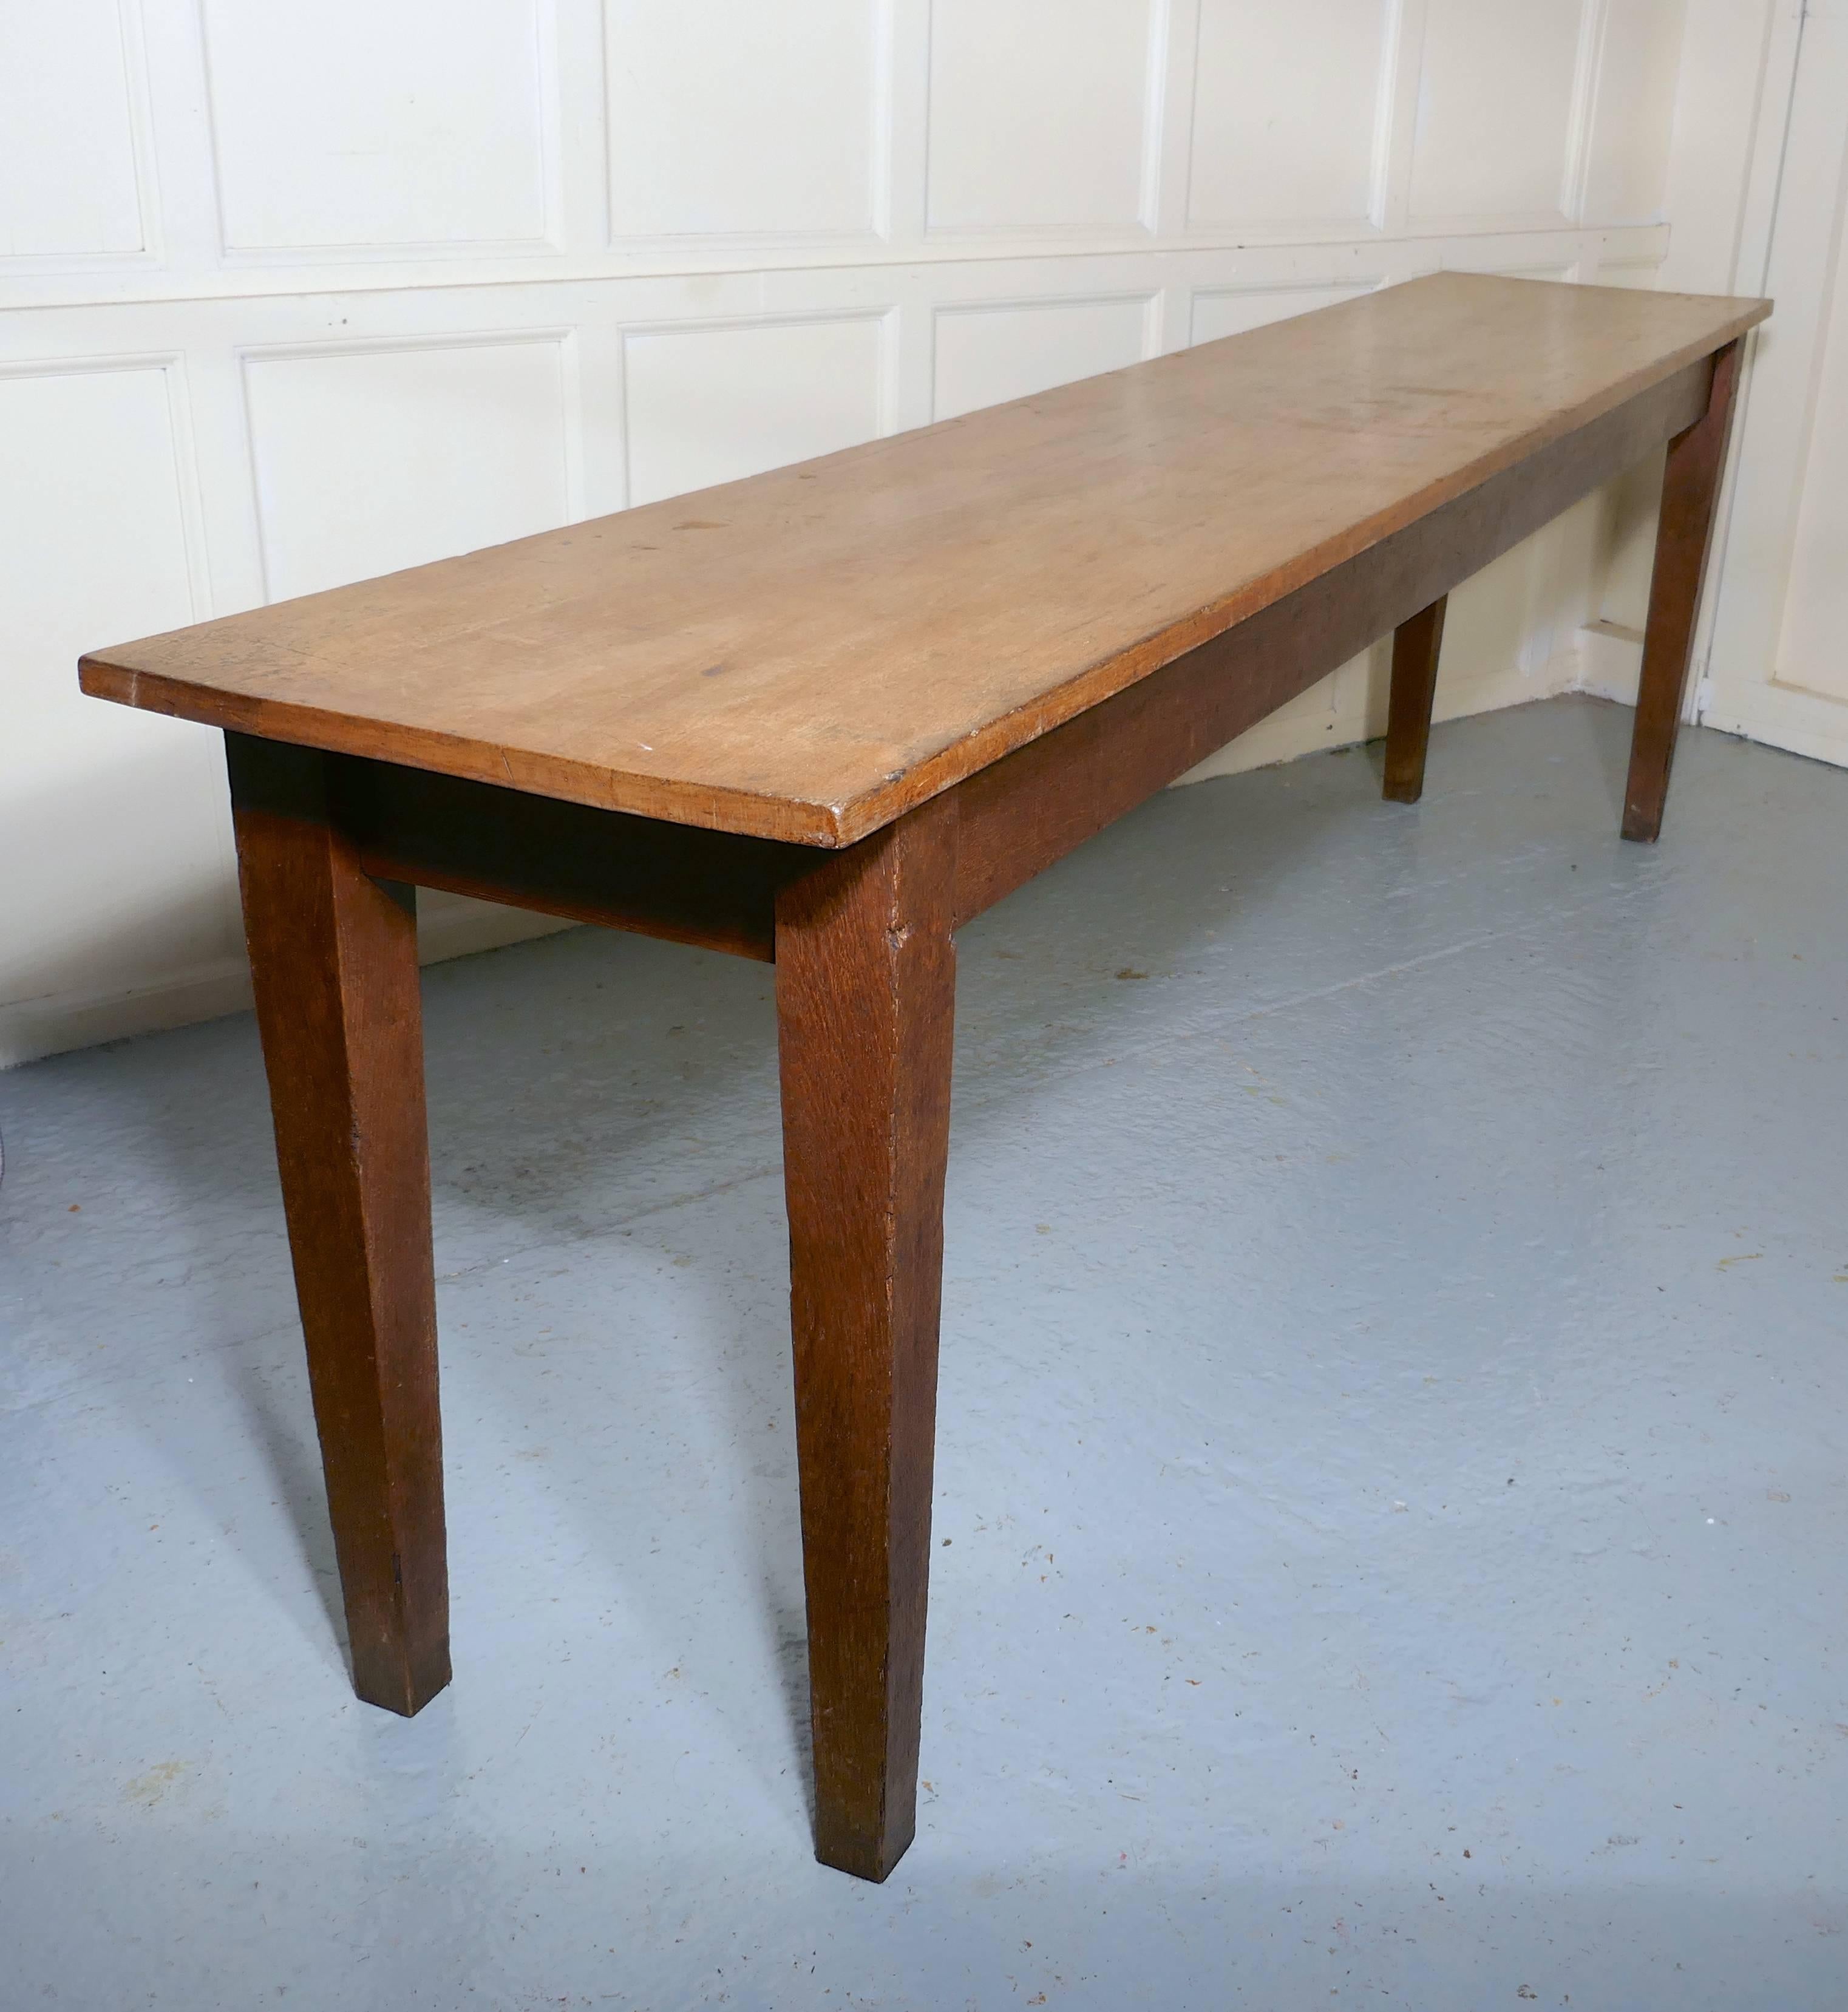 Long narrow golden oak farmhouse kitchen table
 
A lovely golden oak kitchen table, an ideal size for a long narrow kitchen or as a serving table in the dining room, the legs are in their original age darkened stain, the top has been cleaned and